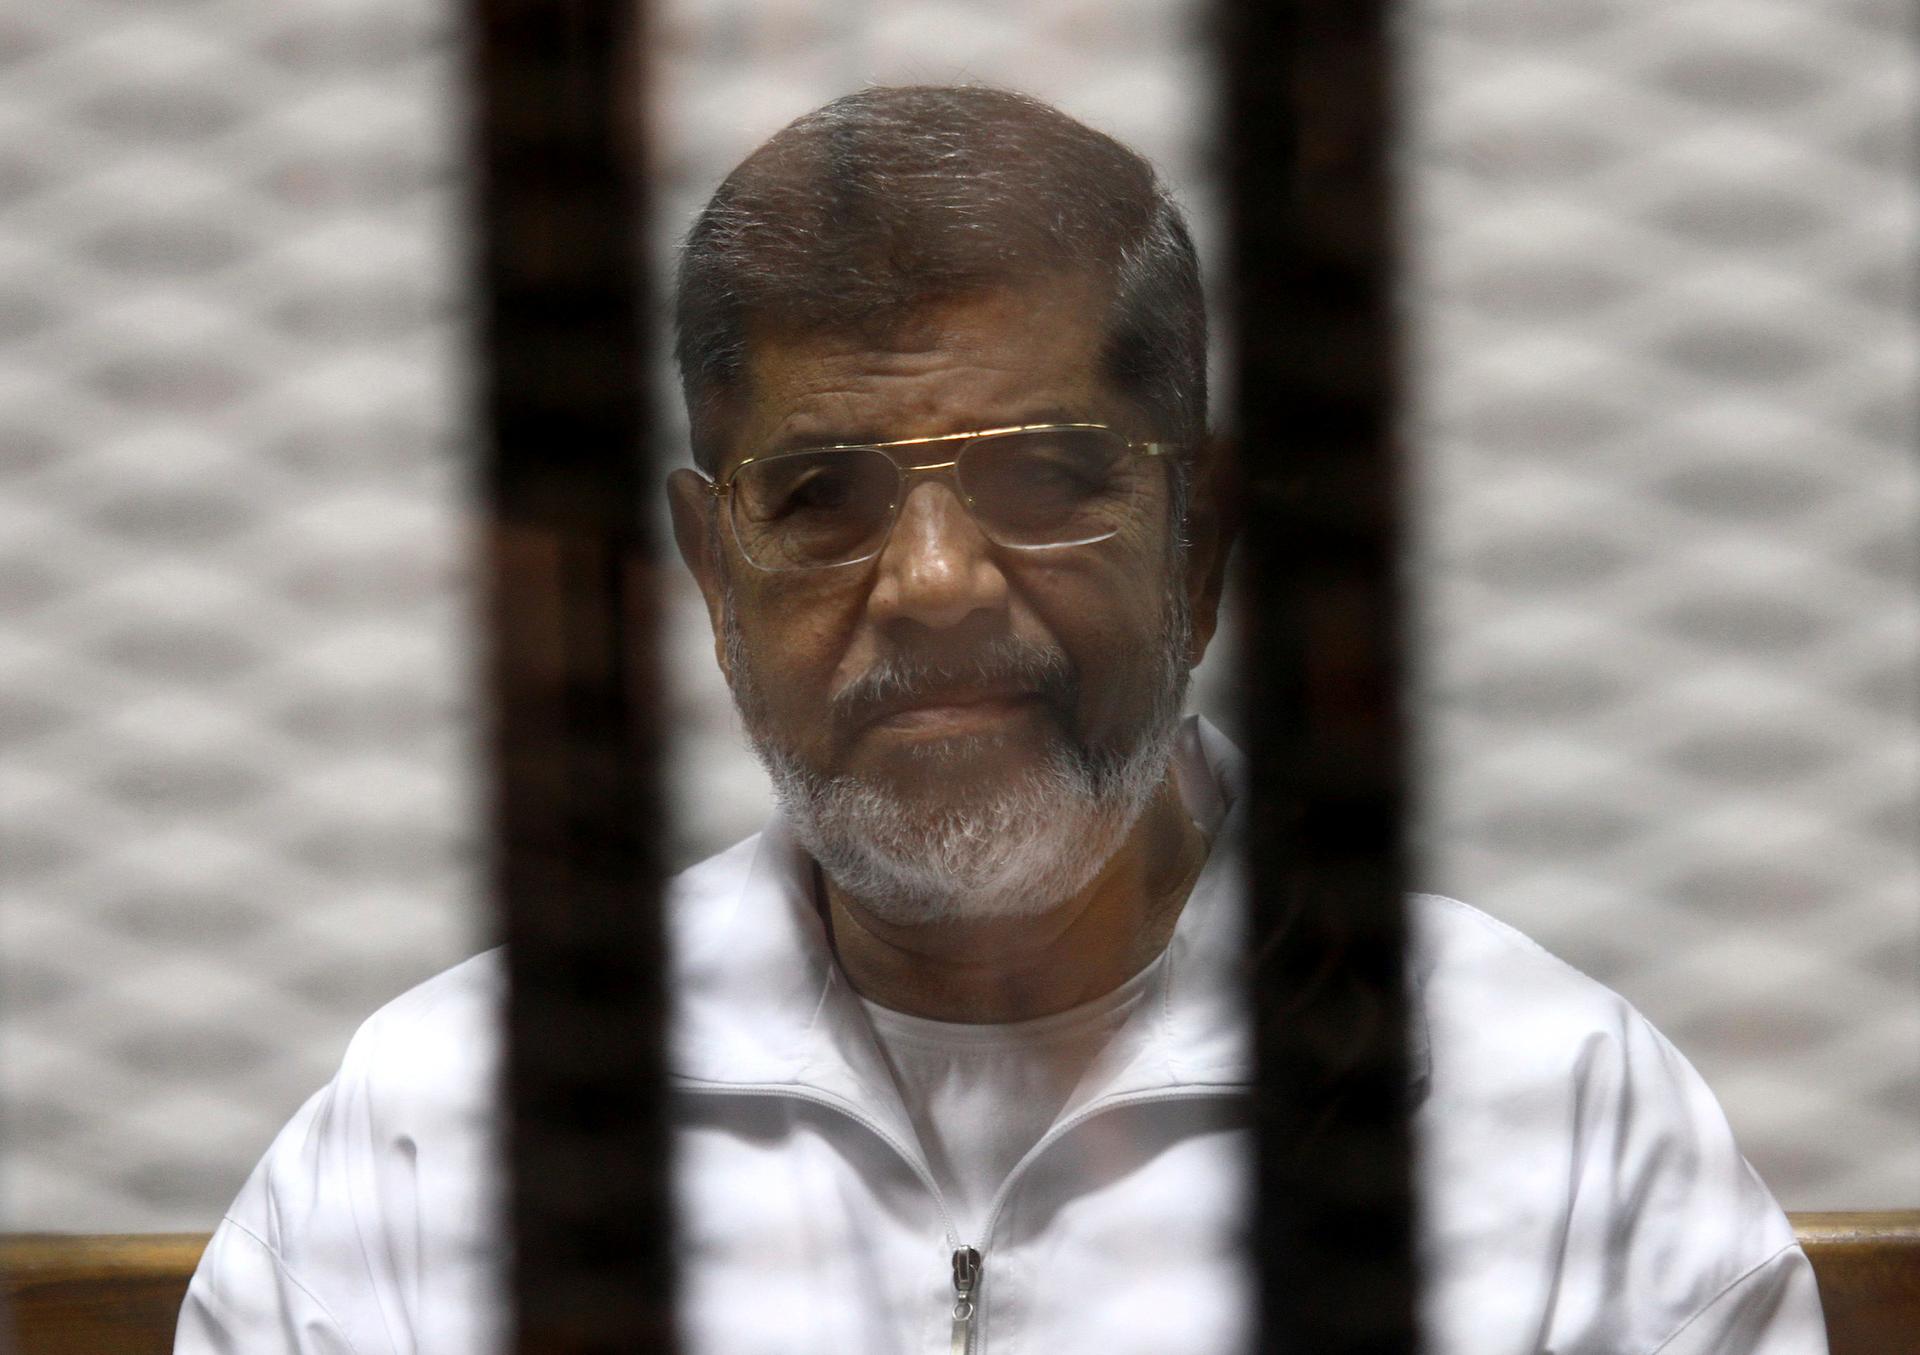 Ousted Egyptian President Mohammed Morsi during his trial at a Cairo court on May 8, 2014. He has been sentenced to 20 years in prison.